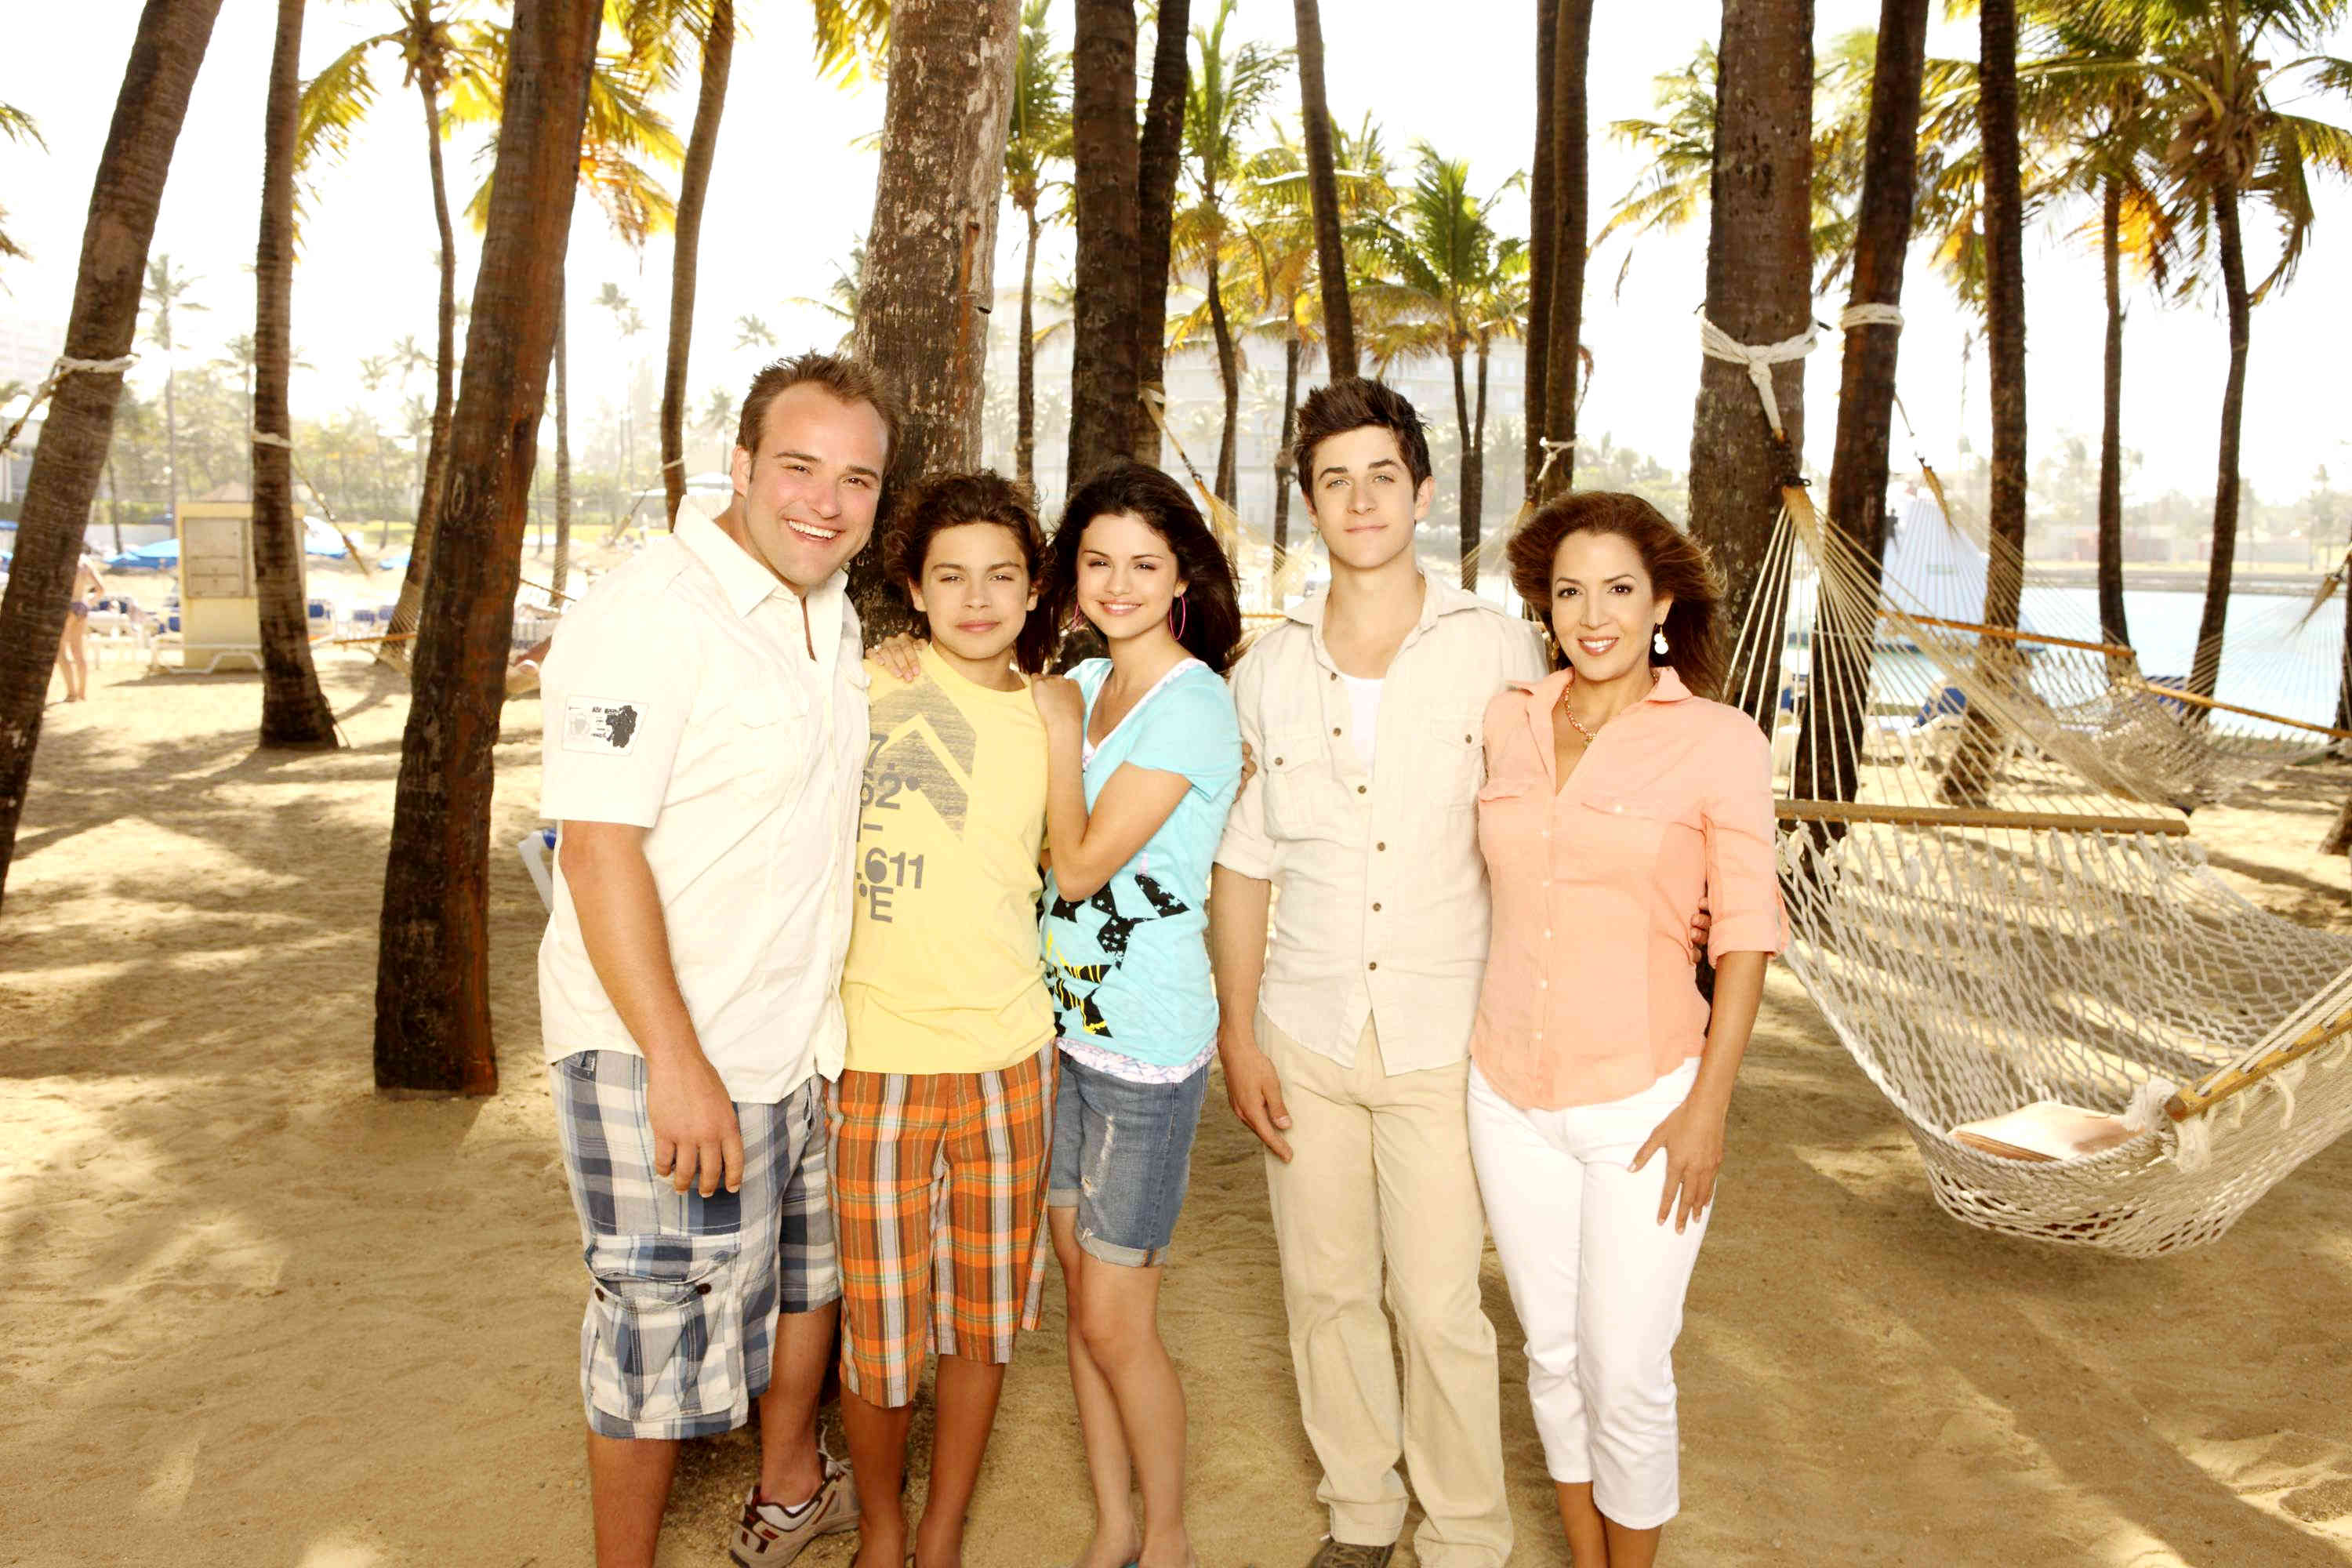 David DeLuise, Jake T. Austin, Selena Gomez, David Henrie and Maria Canals Barrera in Disney Channel's Wizards of Waverly Place: The Movie (2009)